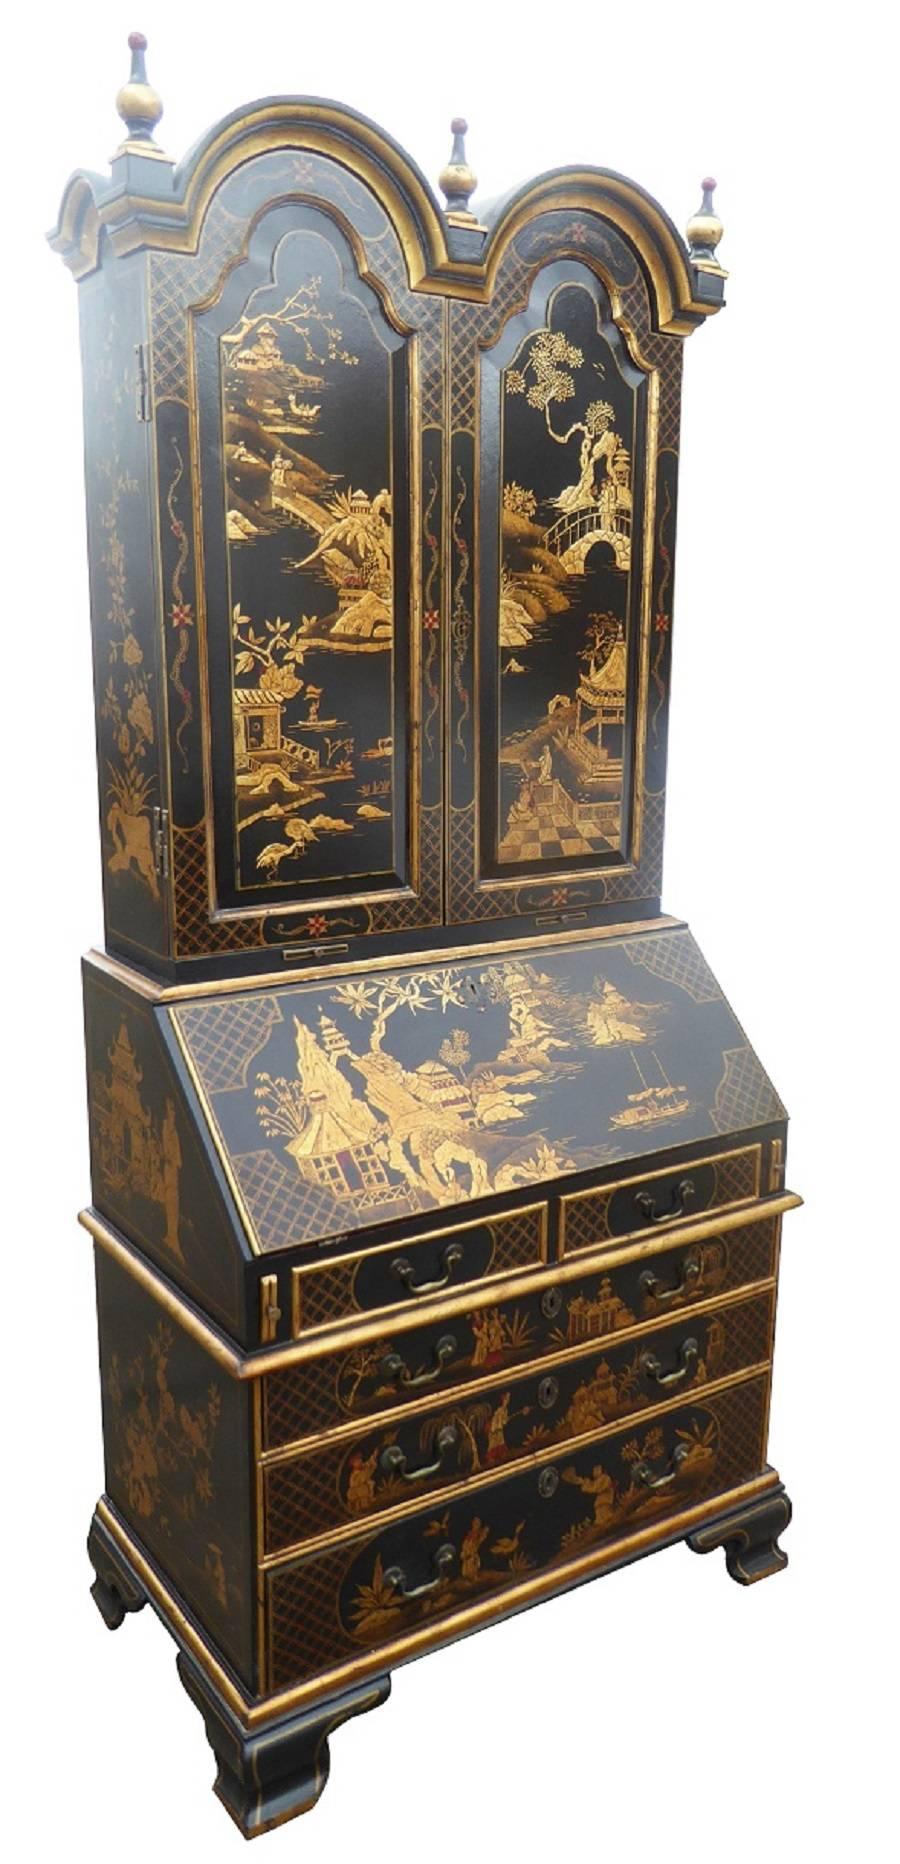 For sale is a good quality 19th century, chinoiserie and gilt decorated 20th century Bureau bookcase. The bookcase has a double dome top with decorative finials, above two paneled doors, both decorated with oriental scenes. These doors open to